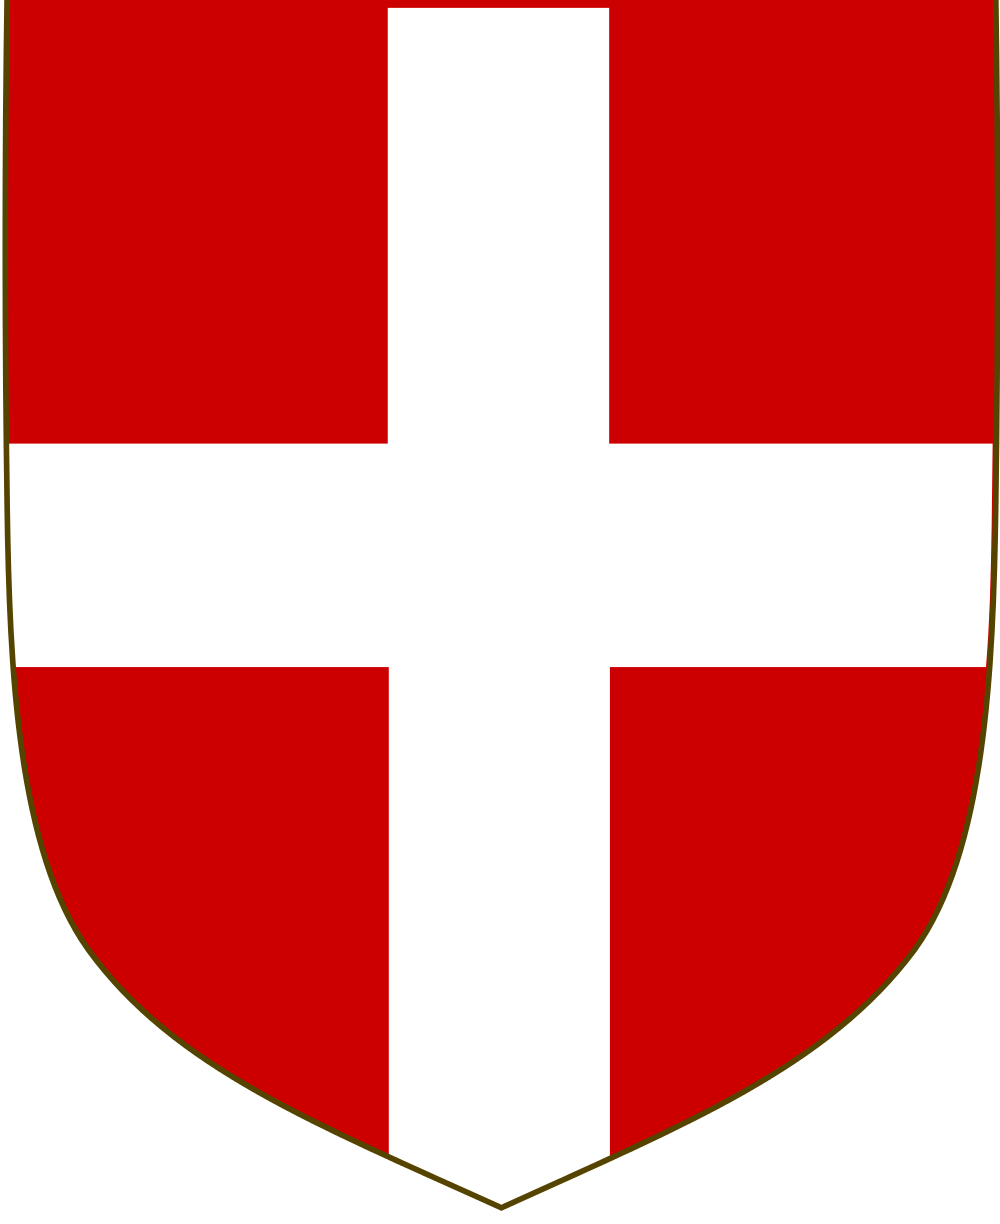 Red Cross in Shield Logo - File talk:Arms of the House of Savoy.svg - Wikimedia Commons